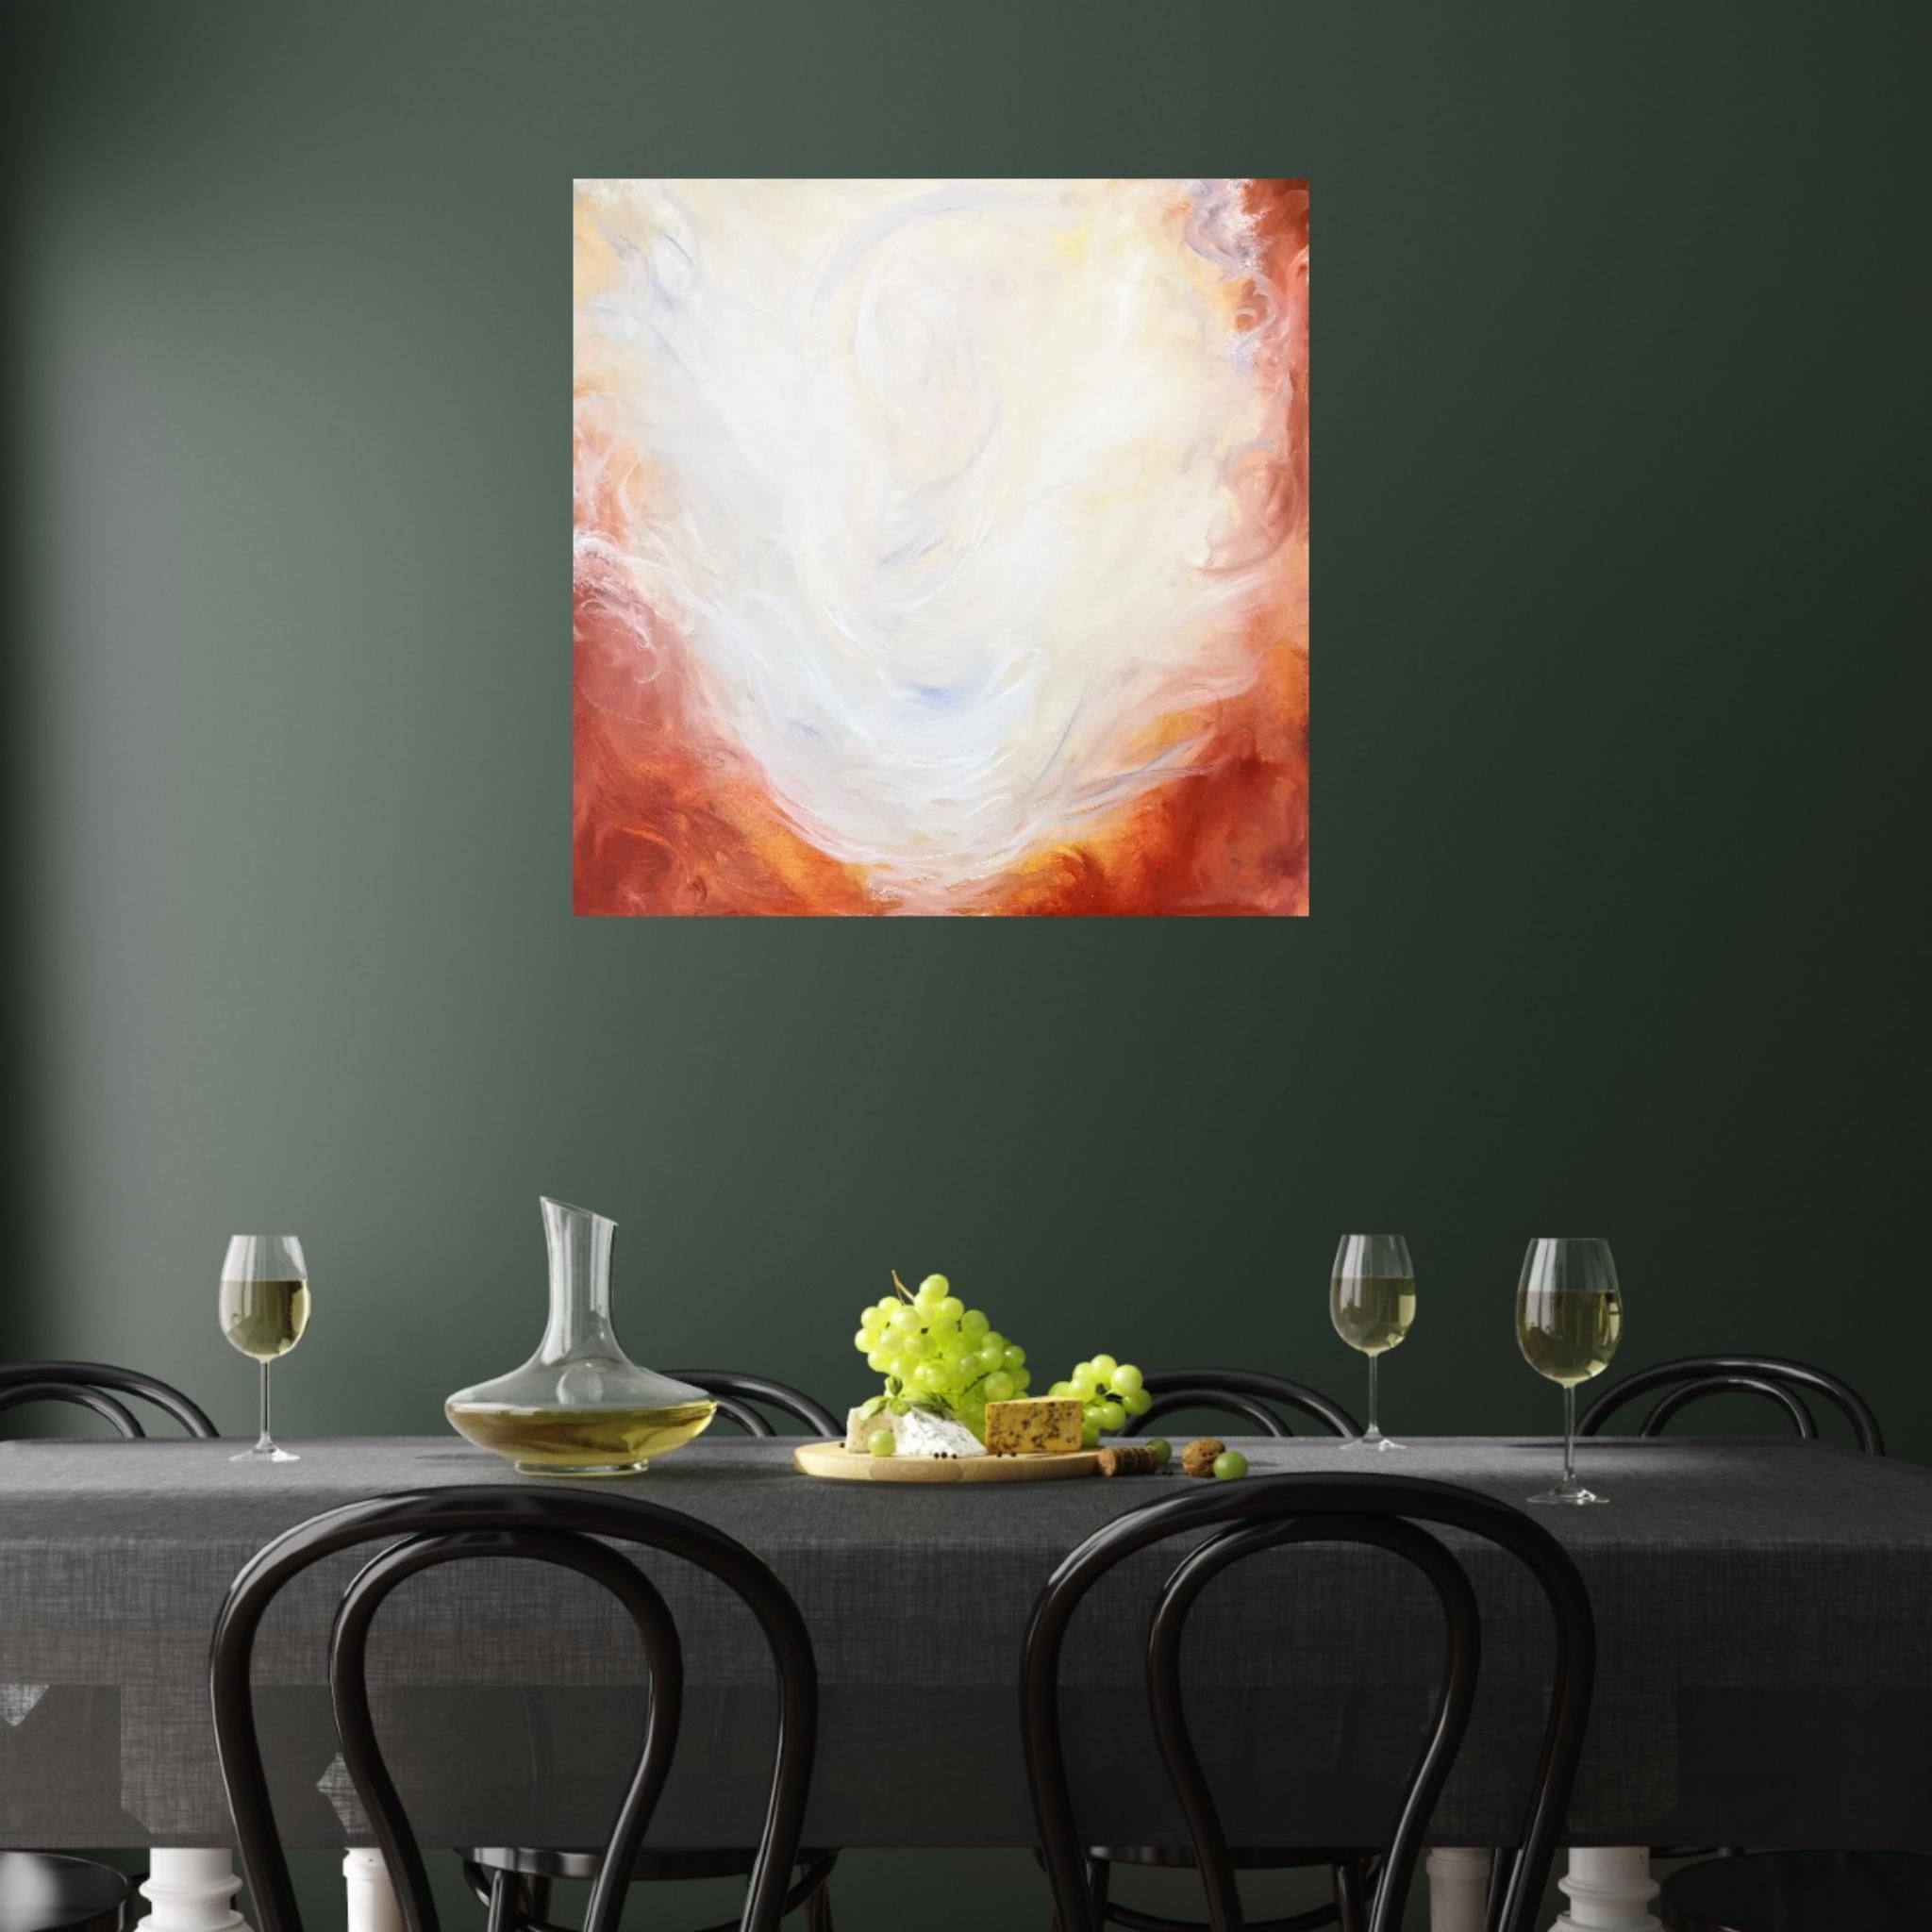 Life everlasting - Abstract expressionist red, orange, and white painting For Sale 1